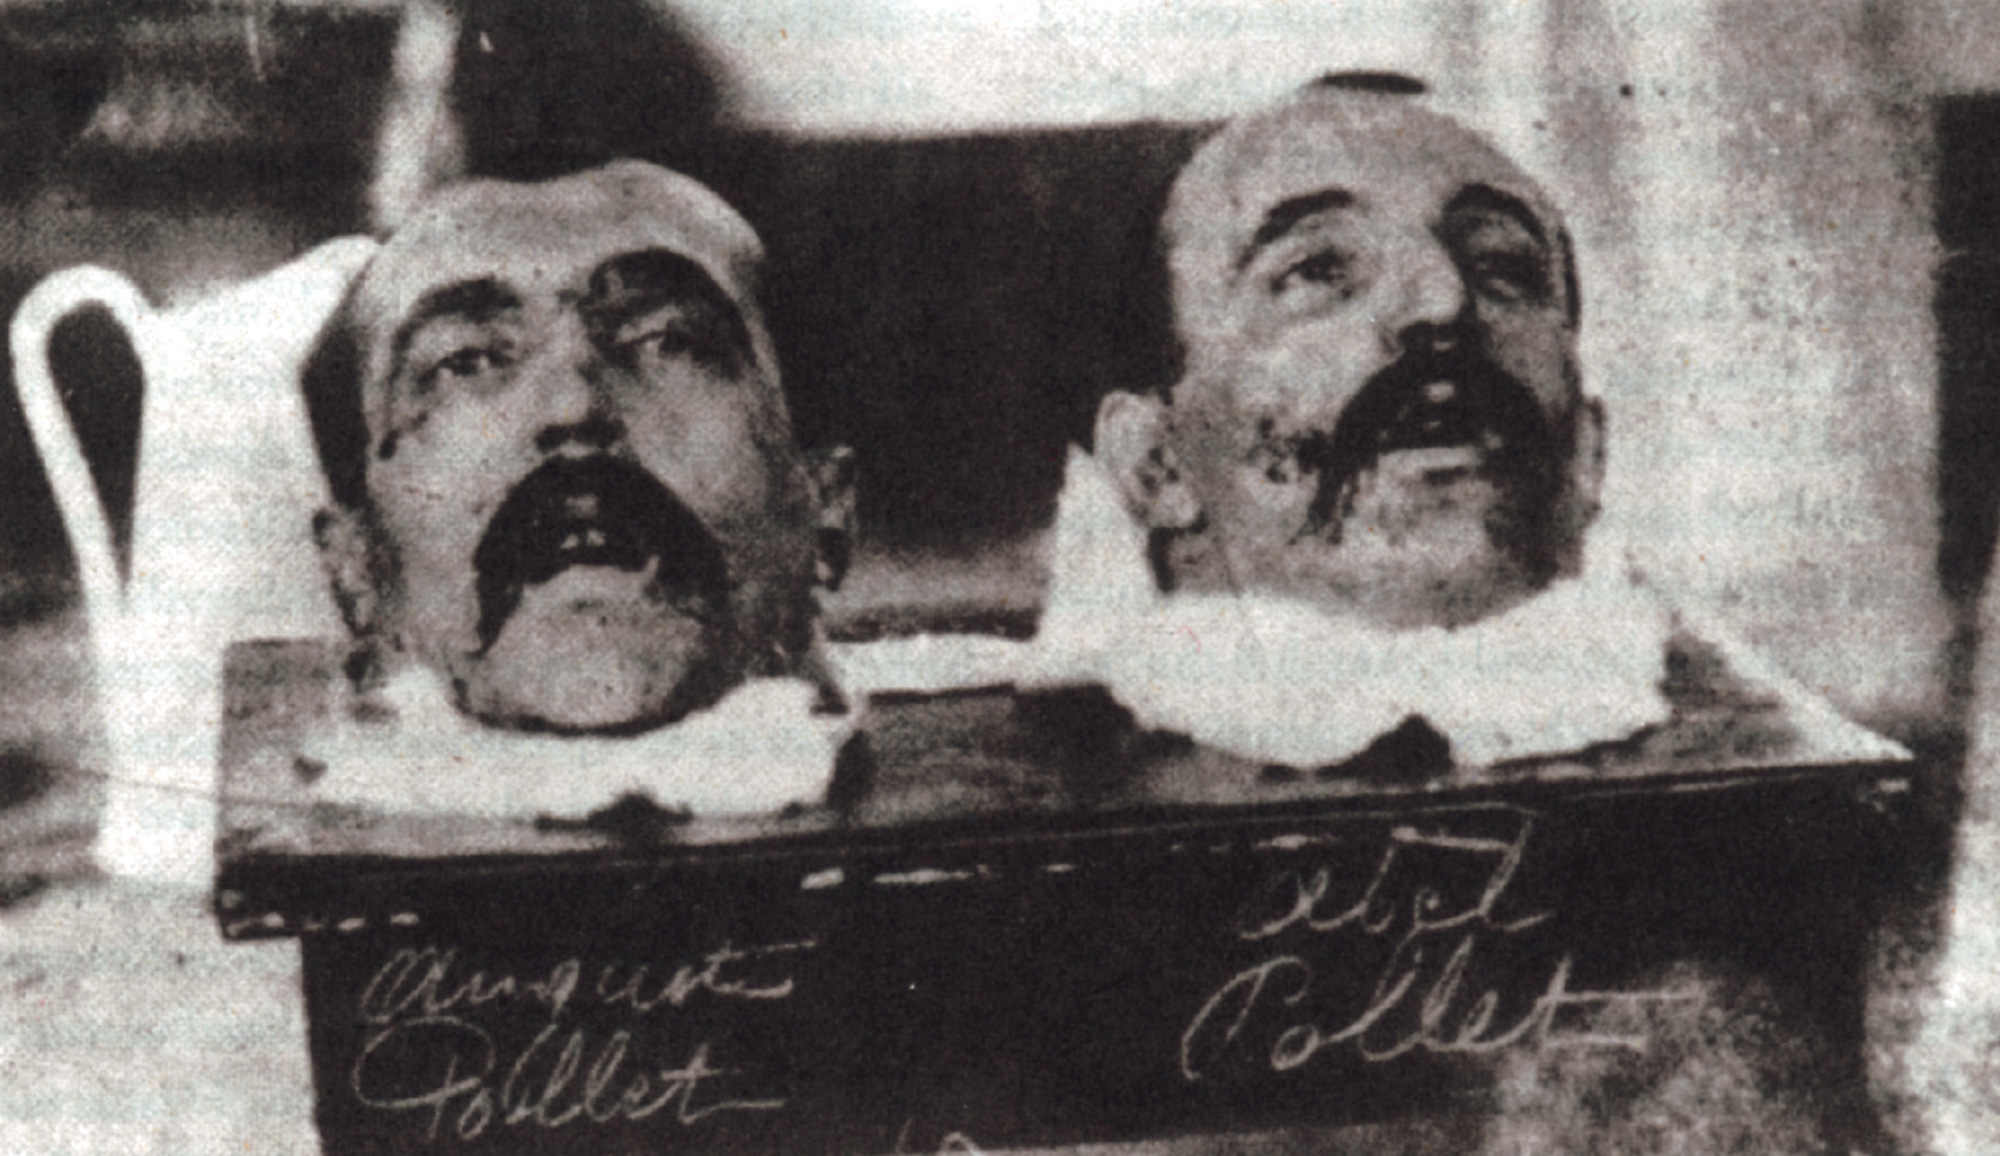 A photograph of the severed heads of twin brothers and convicted armed robbers Auguste and Abel Pollet, guillotined on 11 January 1909.